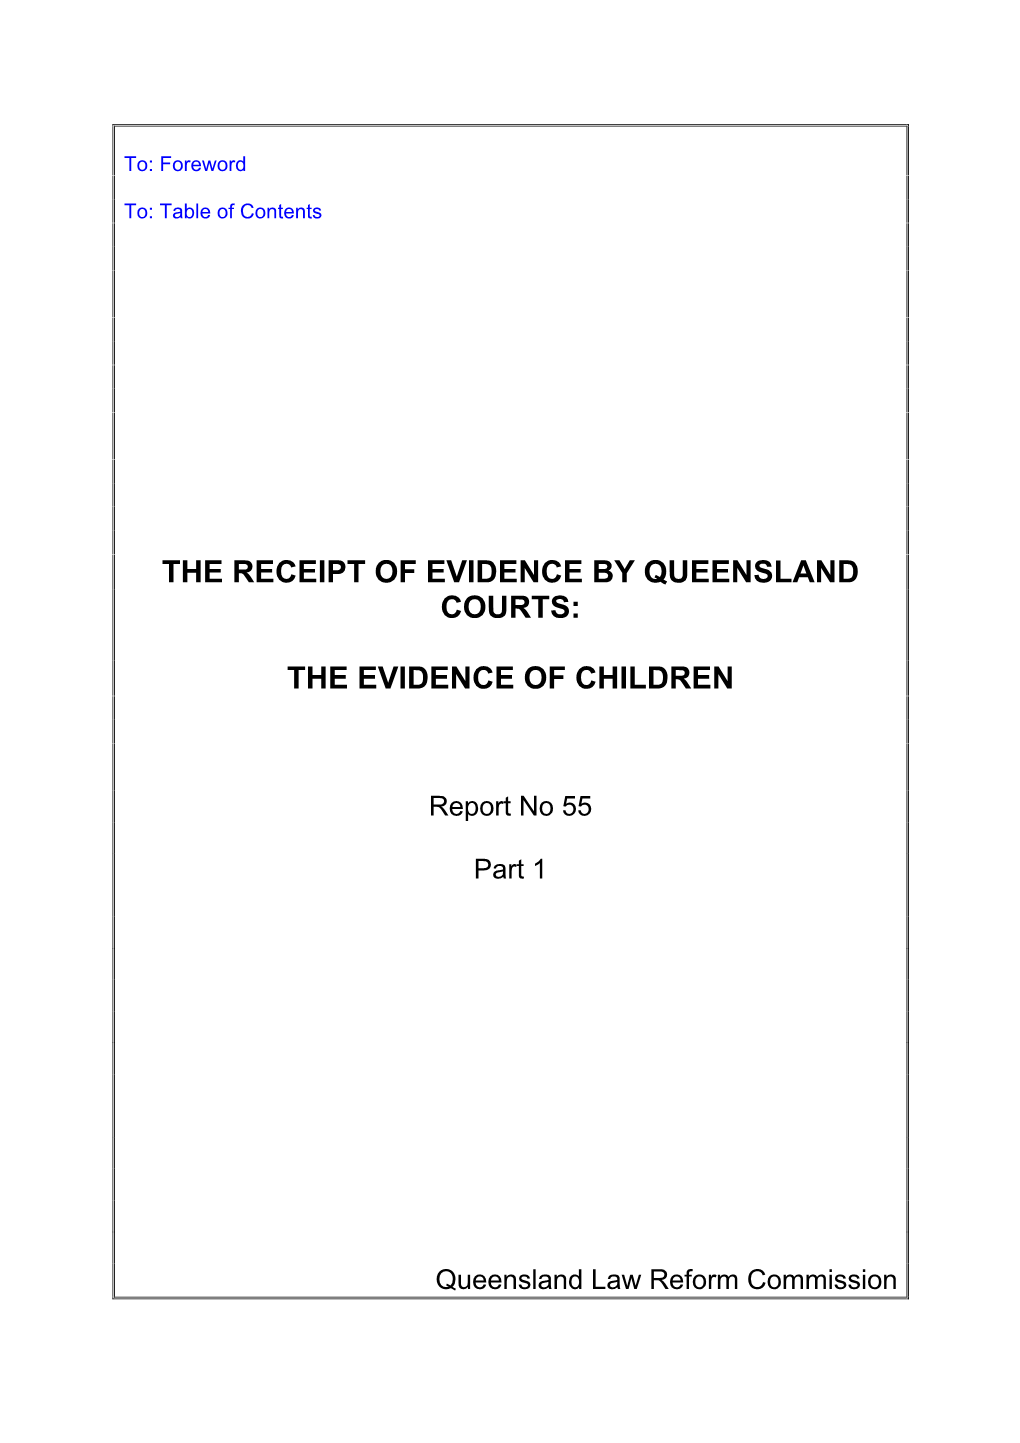 Part 1 the Receipt of Evidence by Queensland Courts: the Evidence